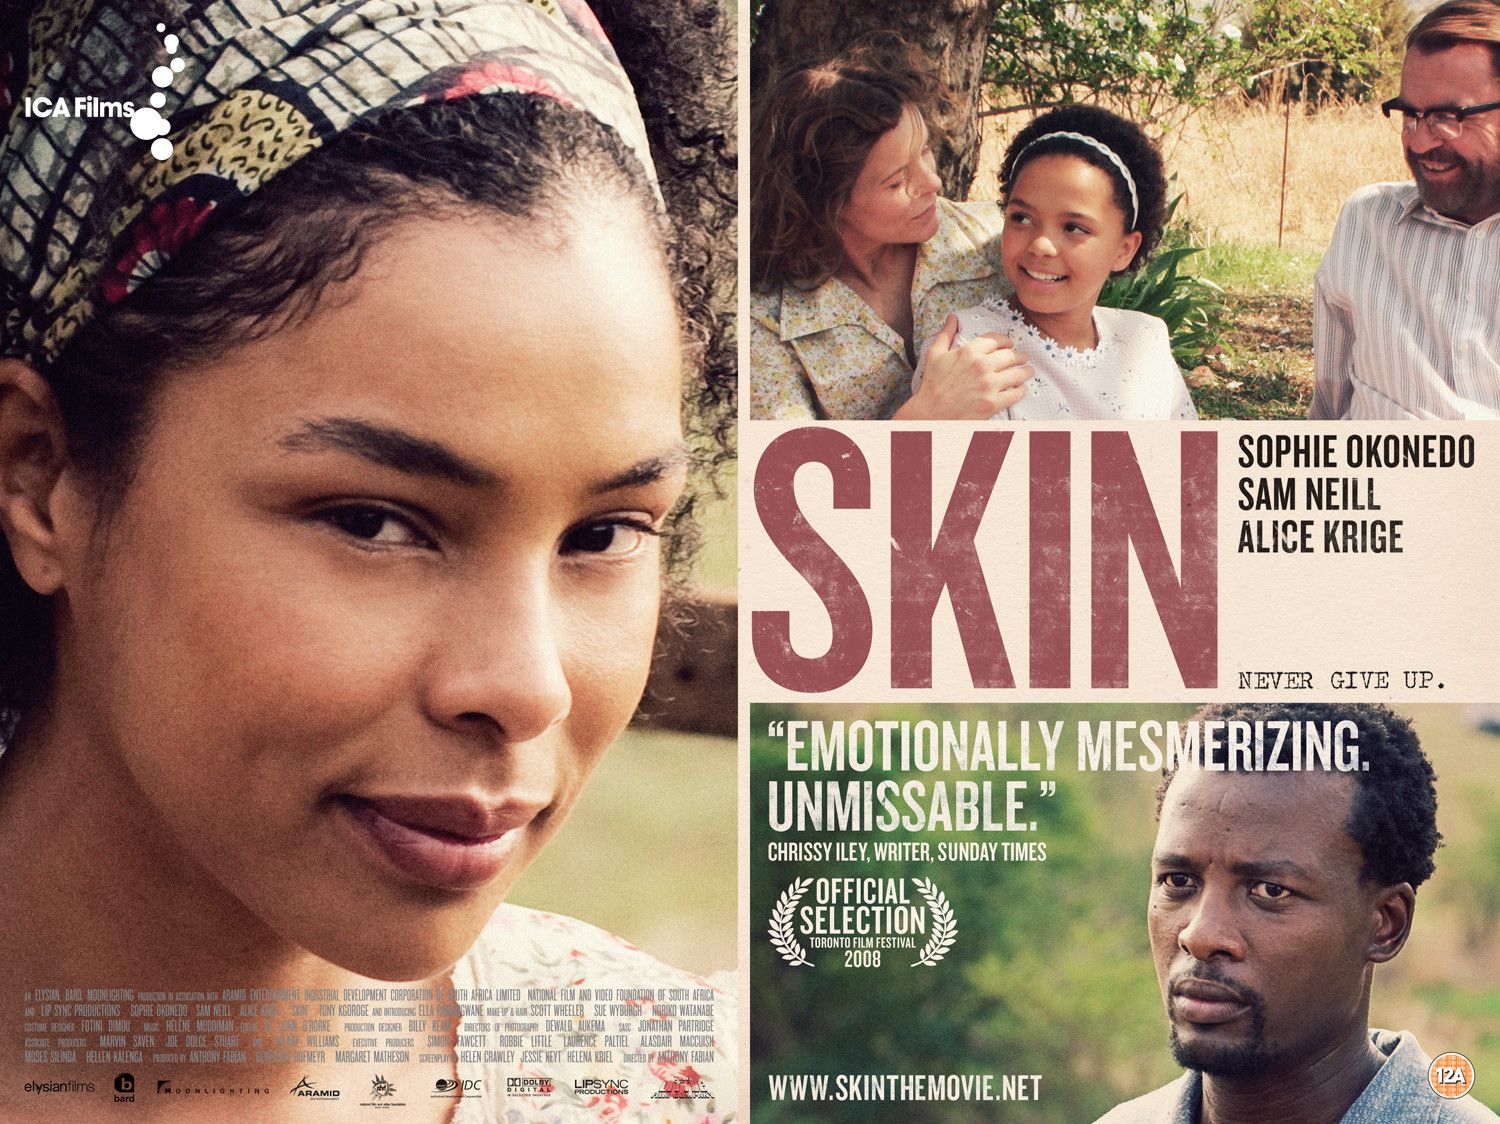 Extra Large Movie Poster Image for Skin (#2 of 2)